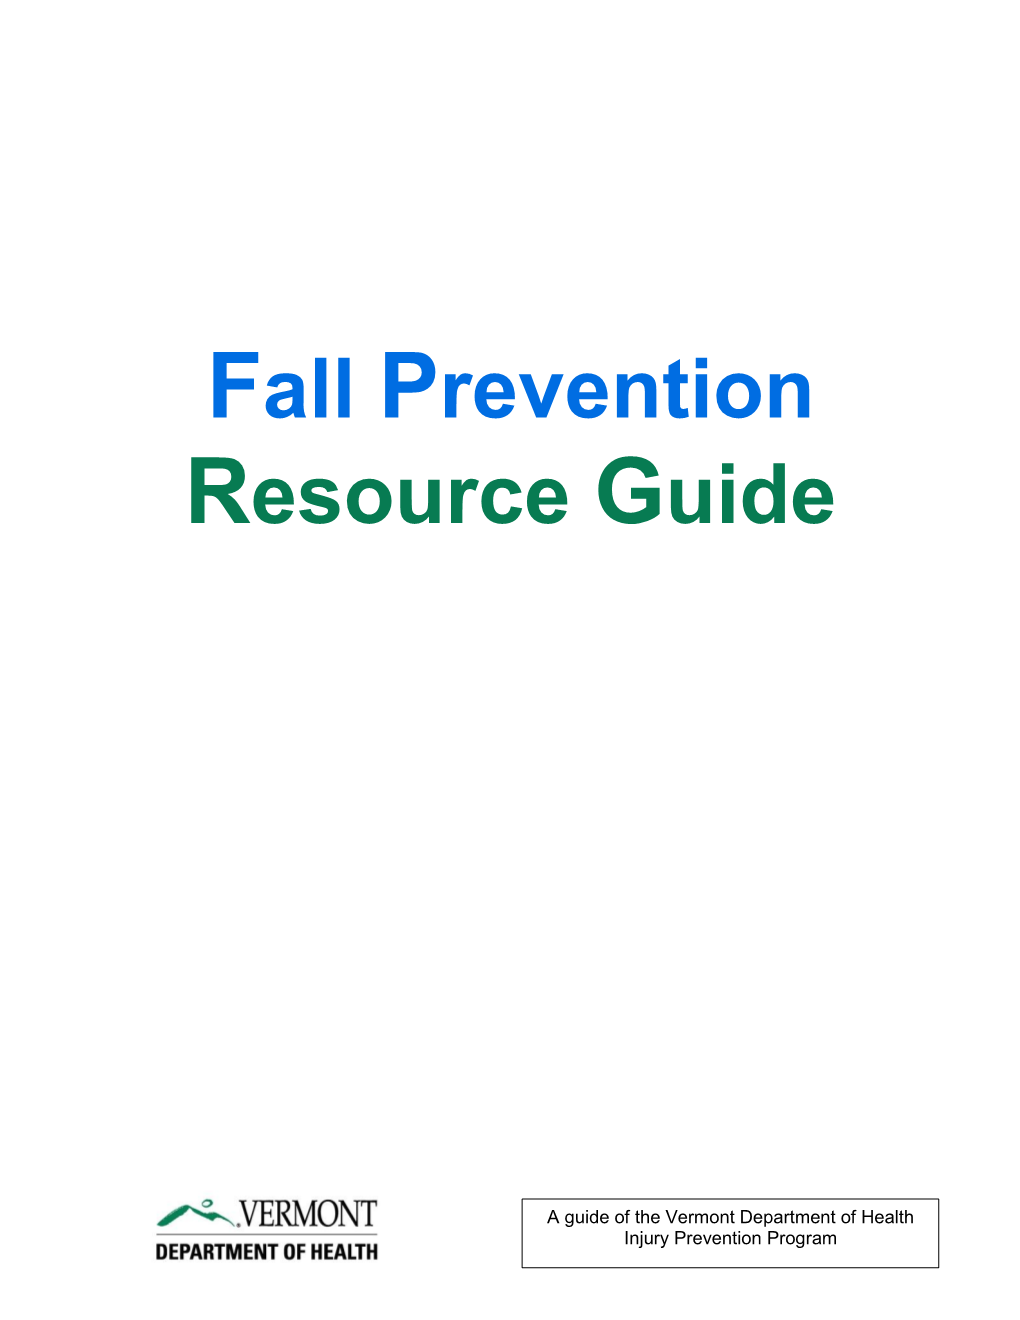 Fall Prevention Resource Guide